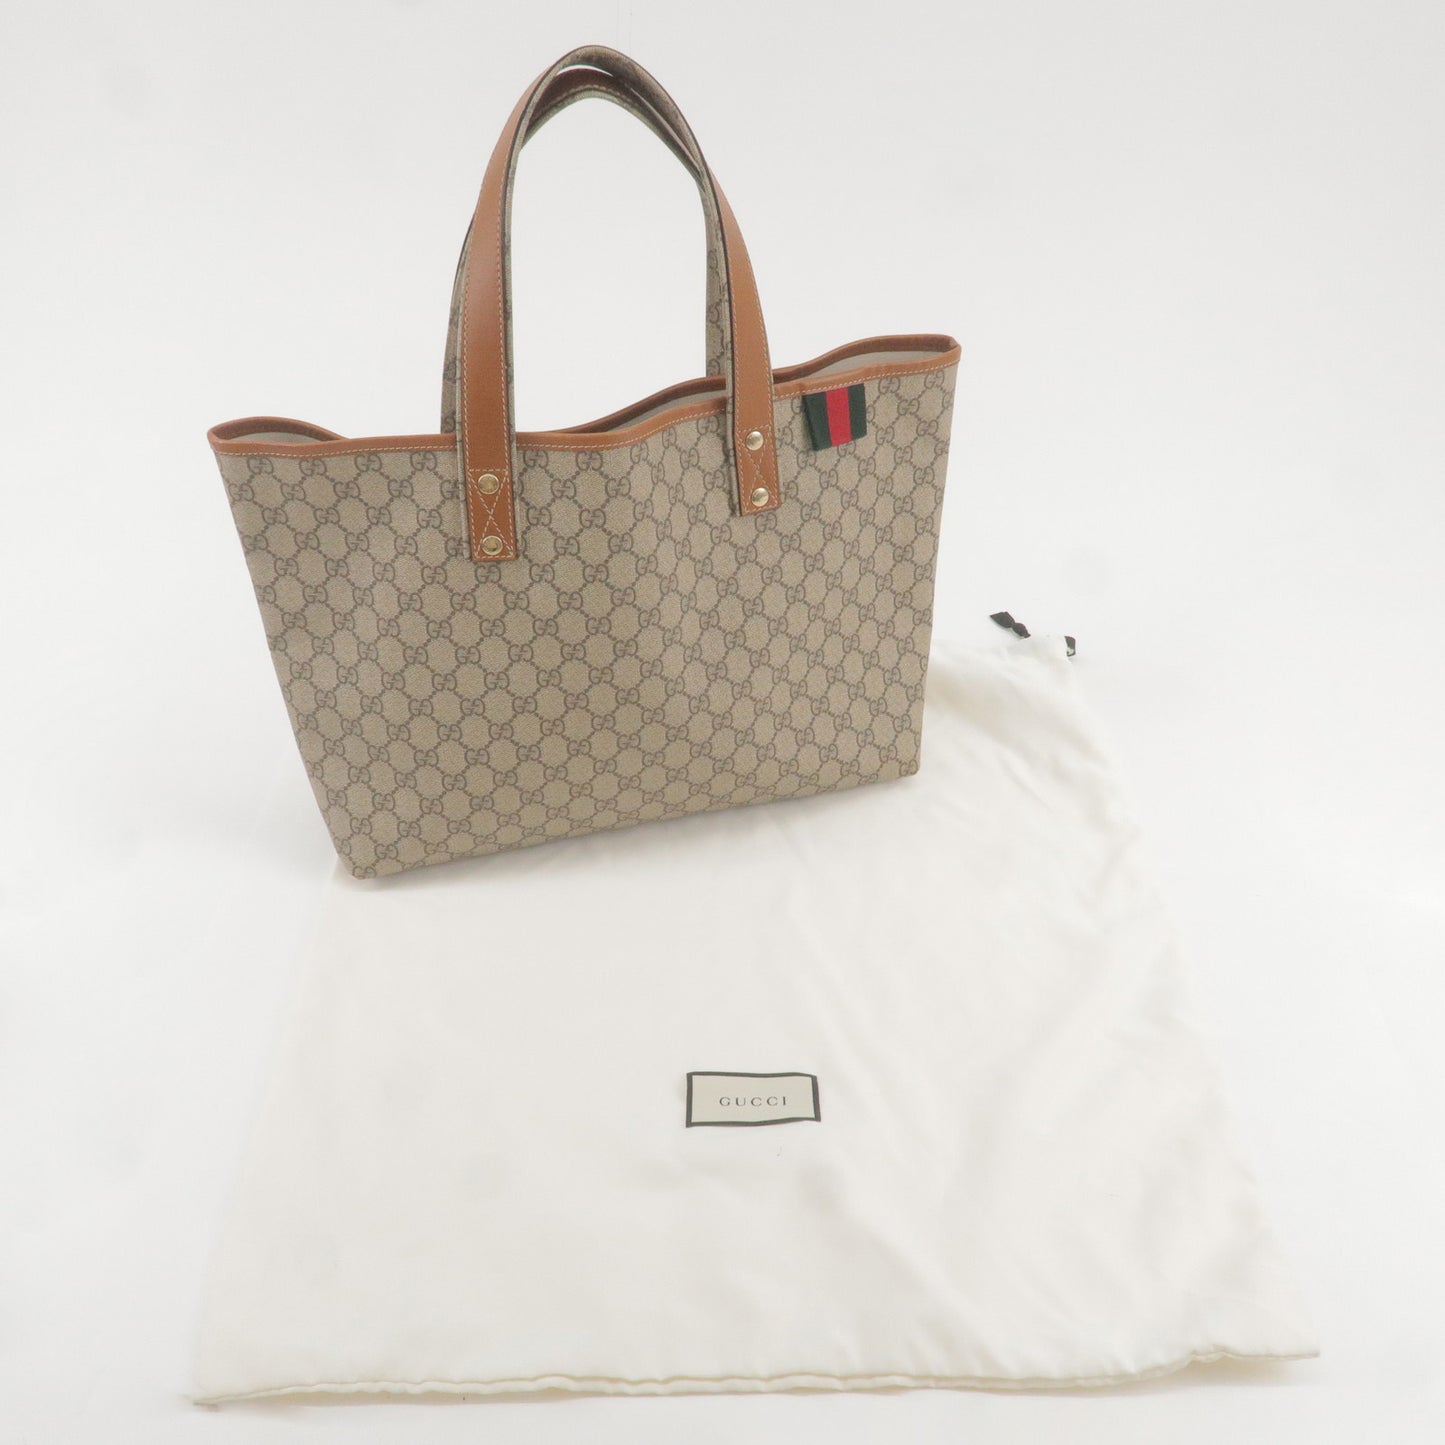 GUCCI Sherry GG Supreme Leather Tote Bag Brown Beige 211134